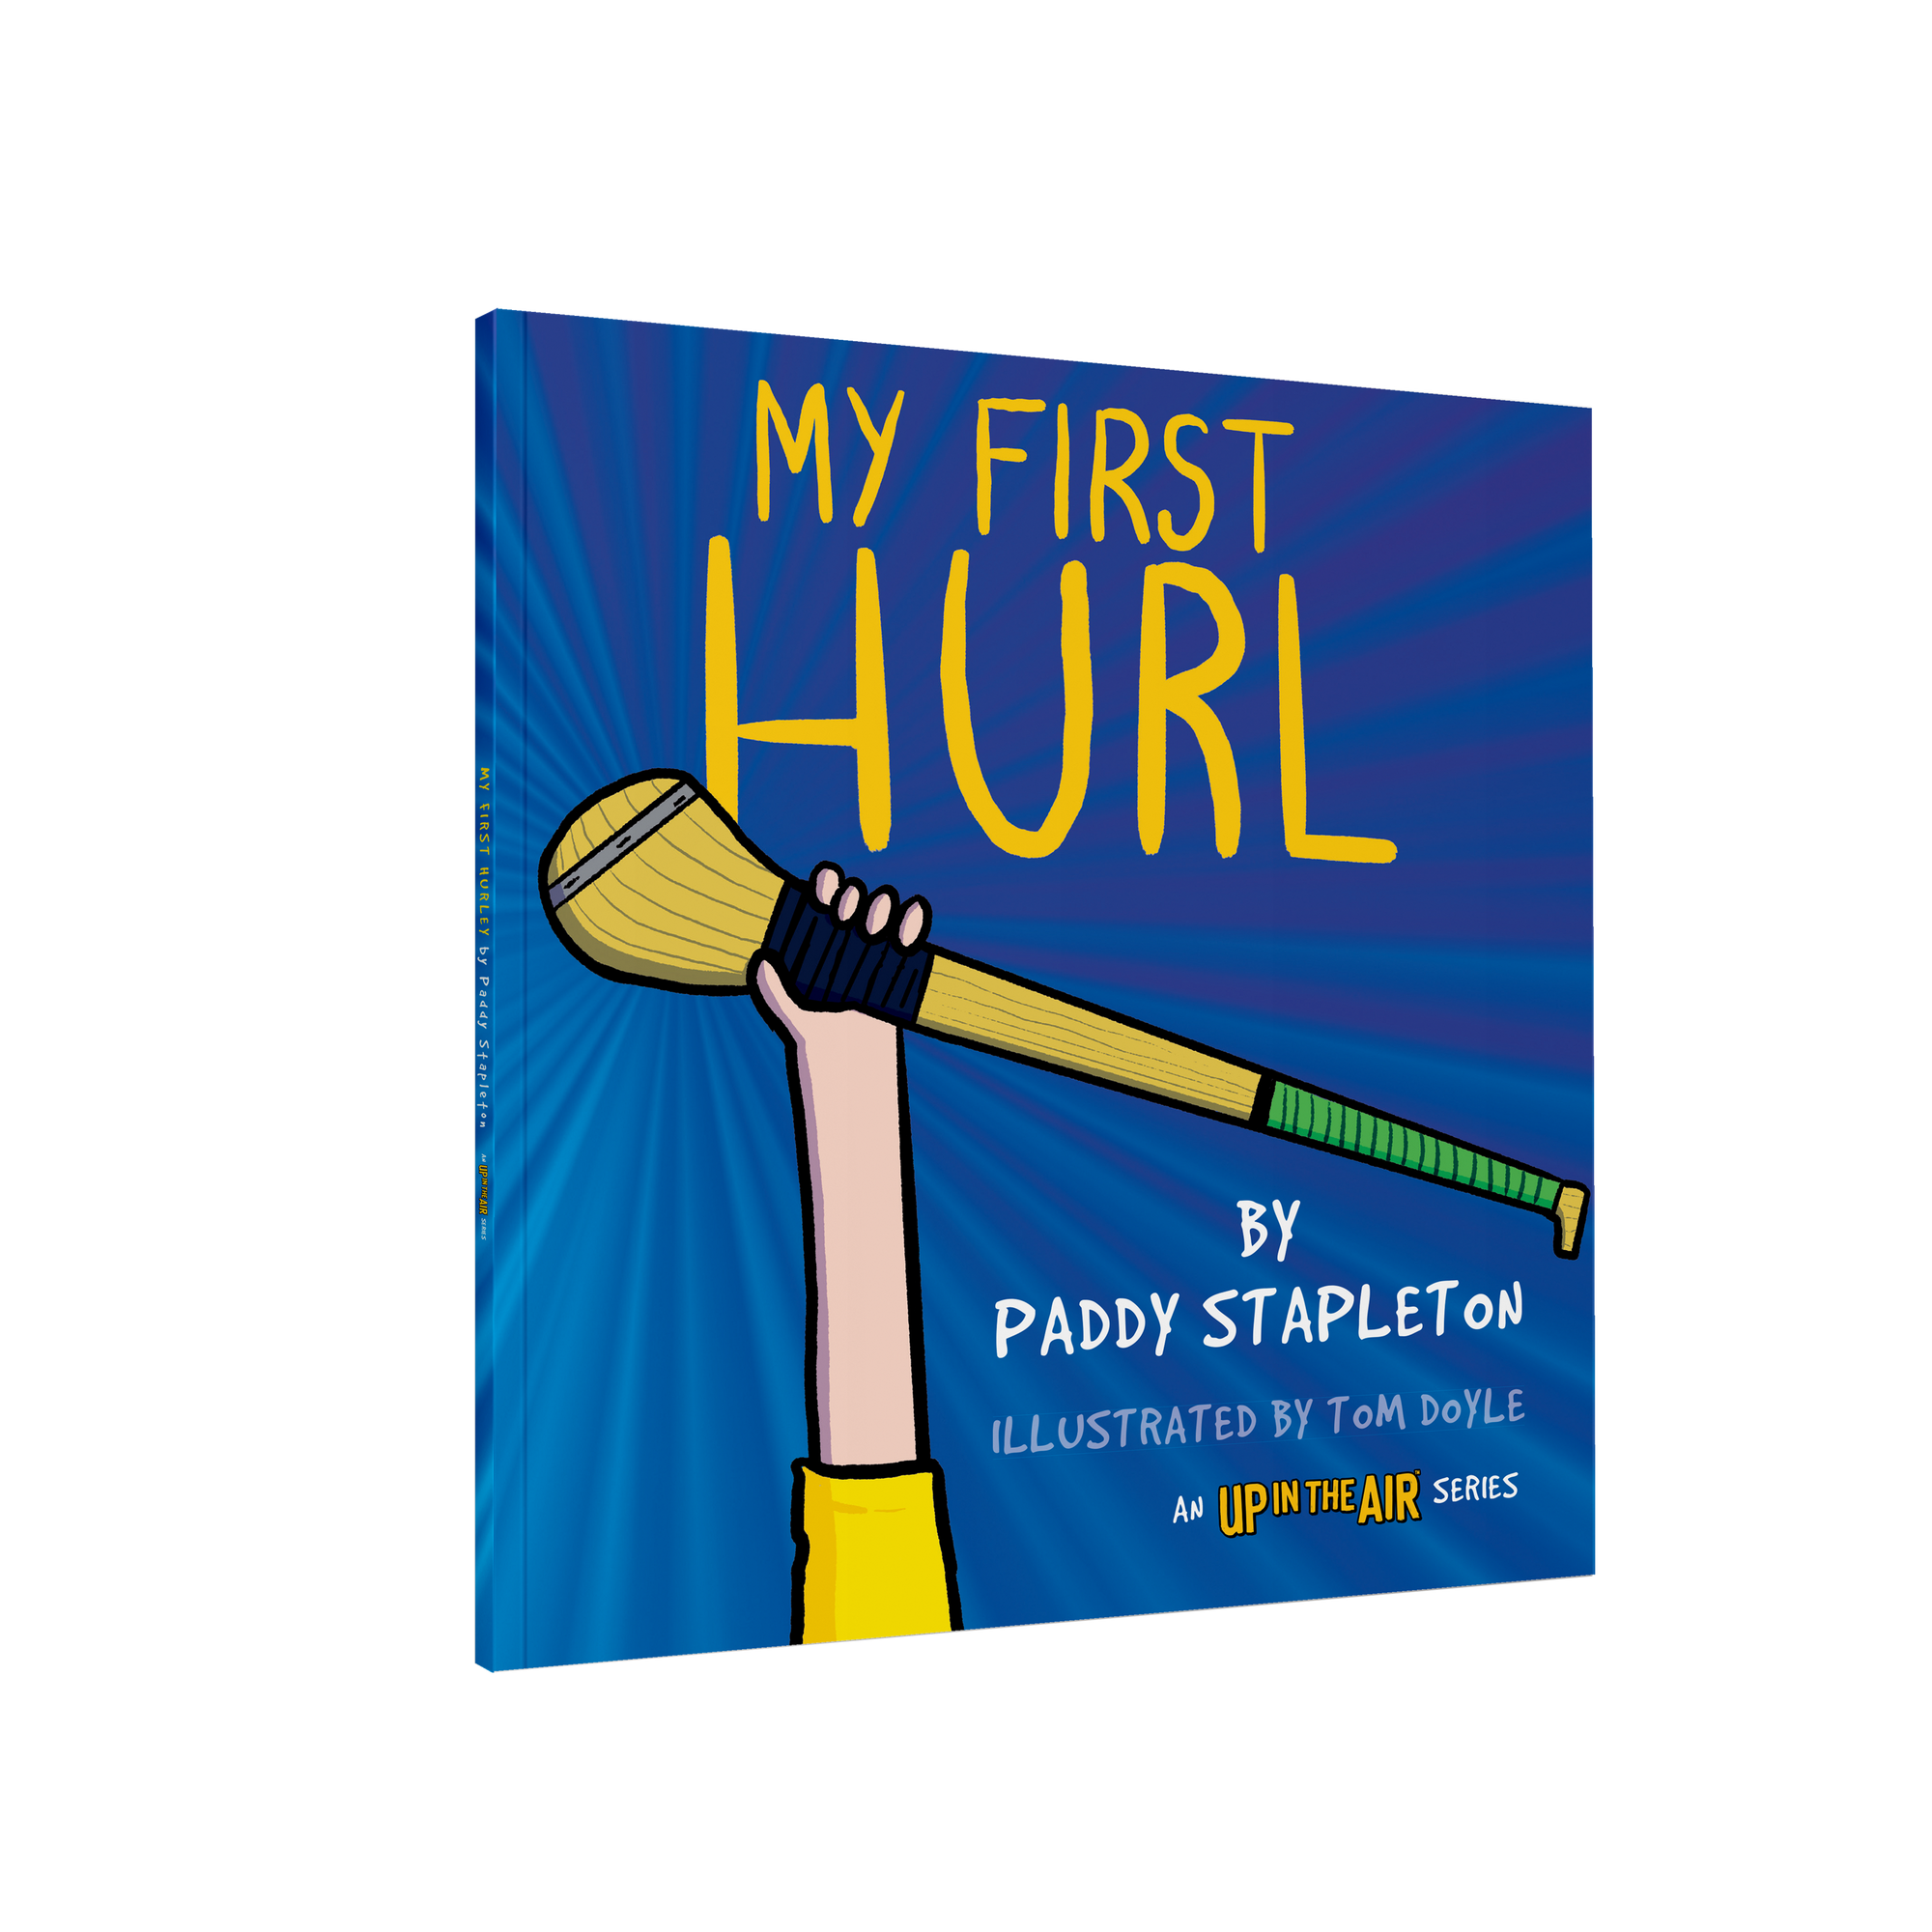 My First Hurl by Paddy Stapleton